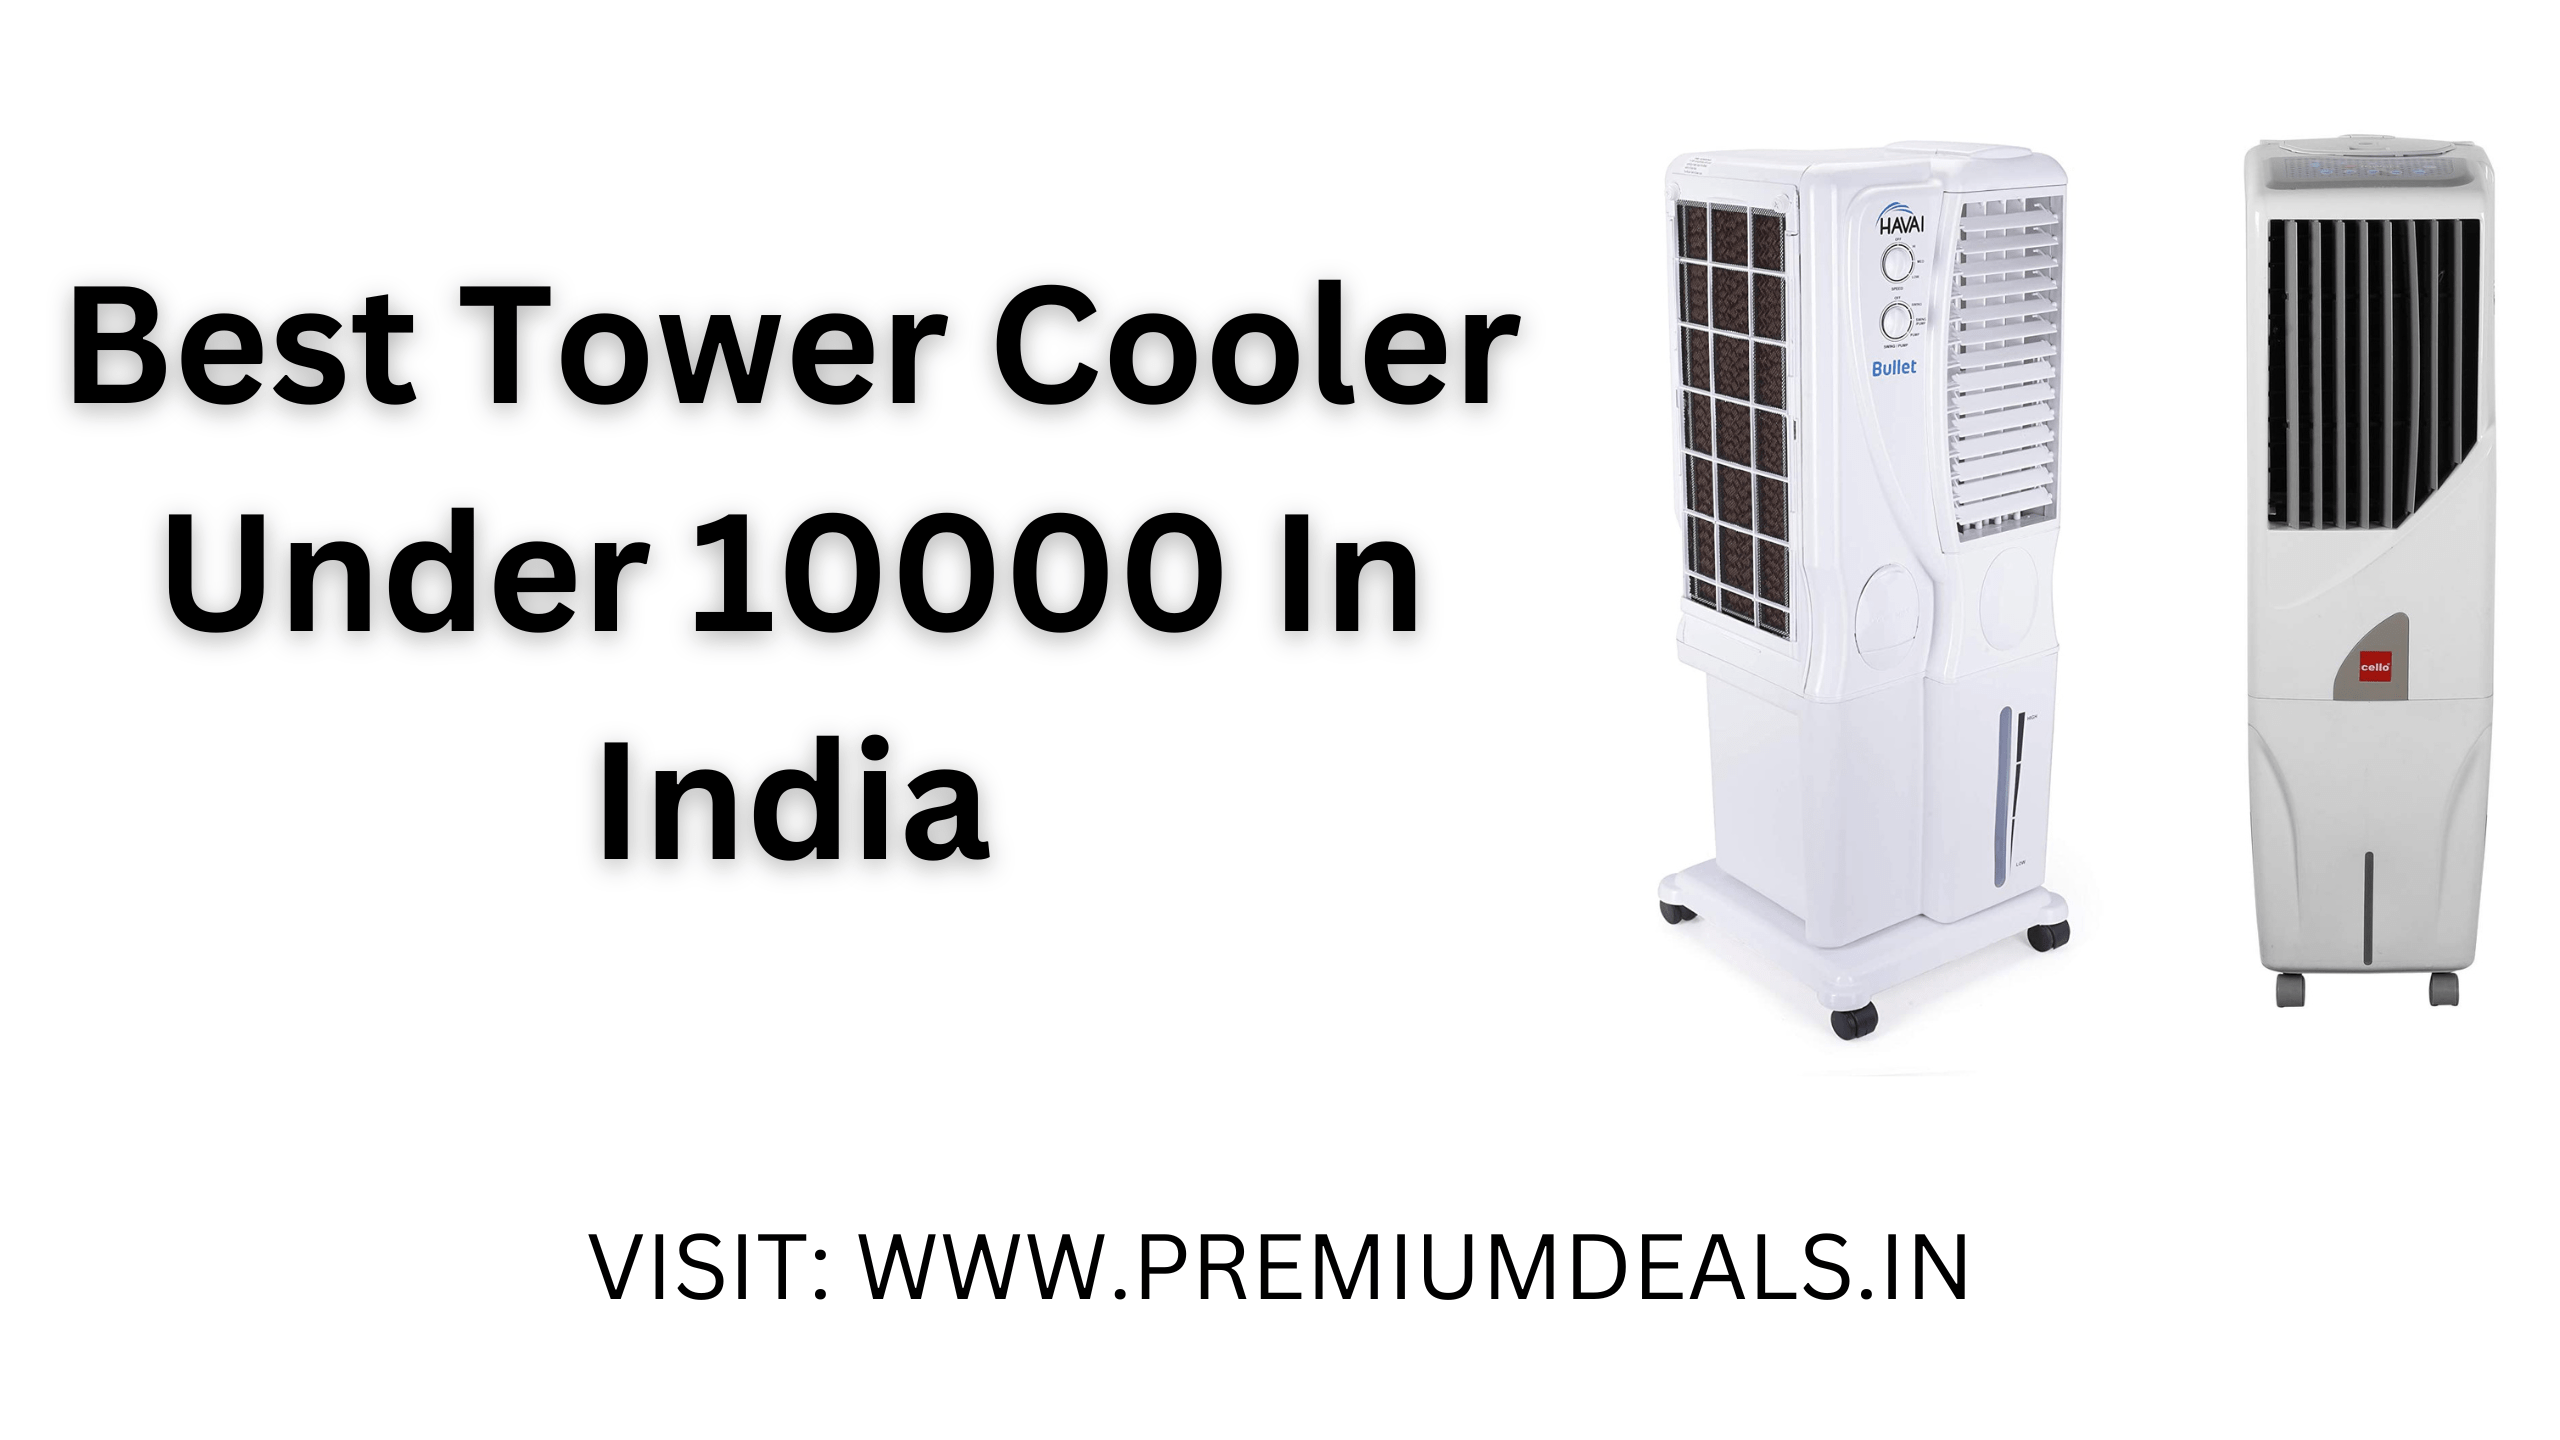 Best Tower Cooler Under 10000 In India